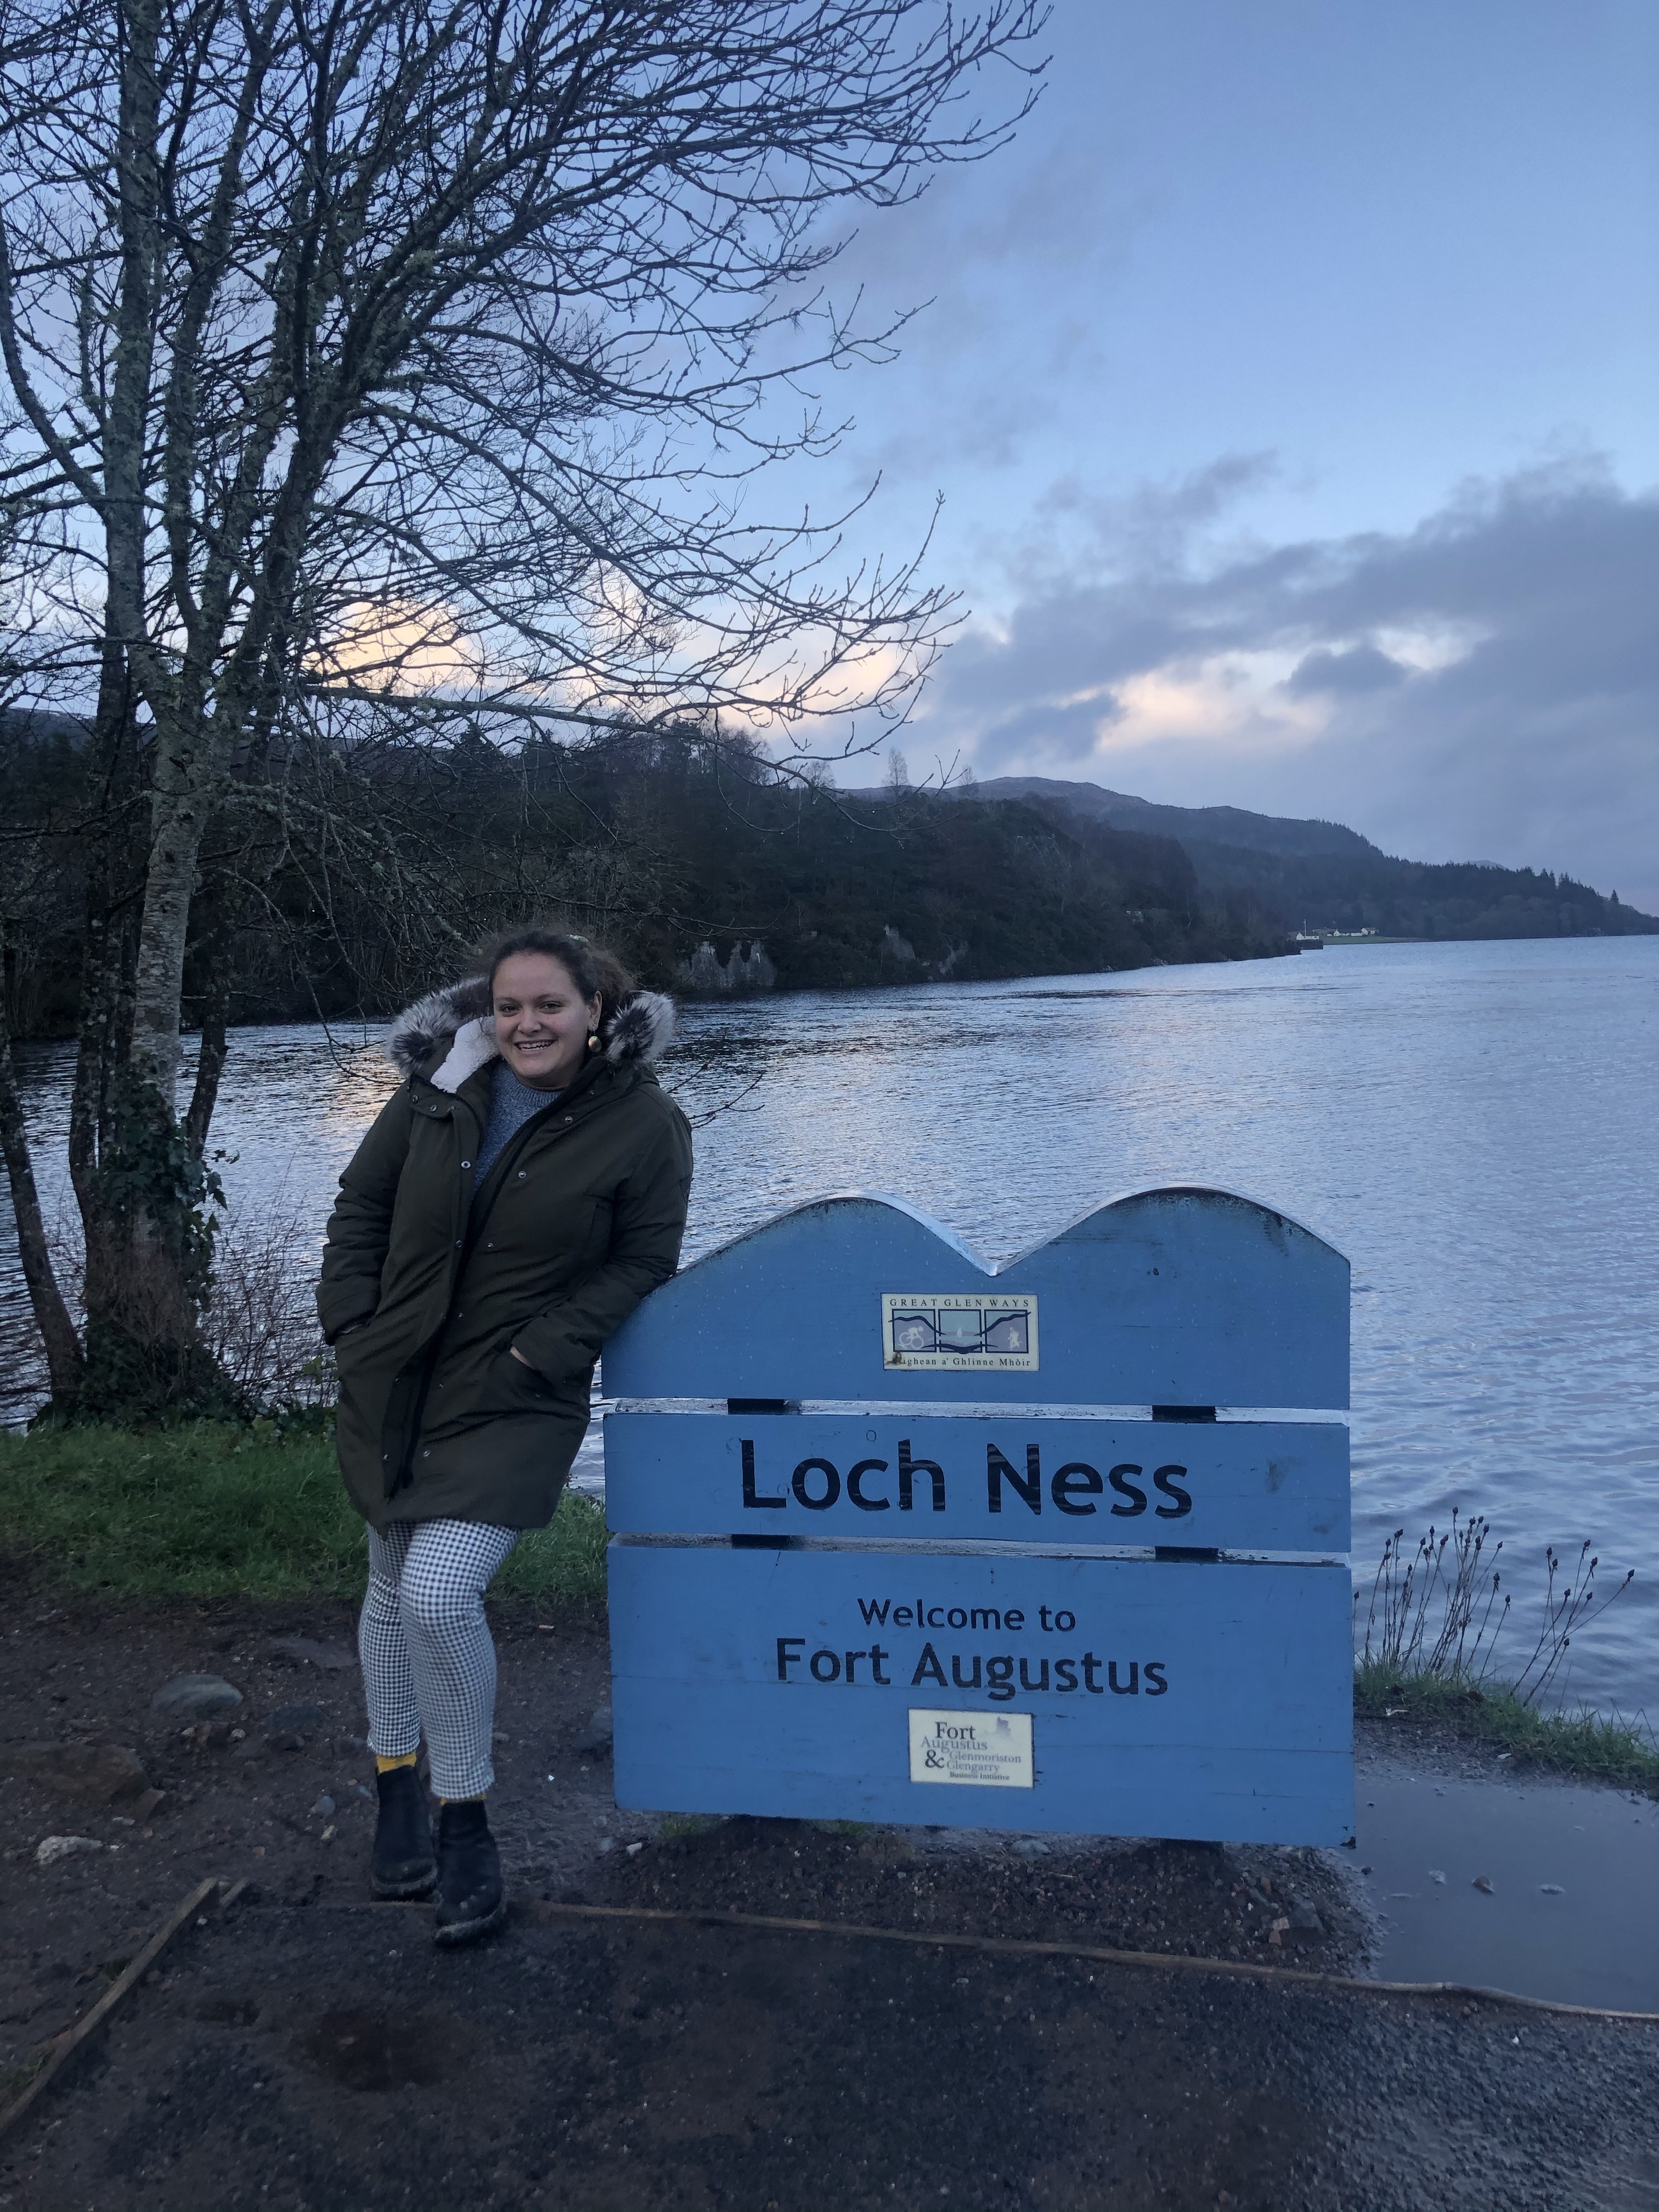 Francesca smiling in front of Loch Ness.